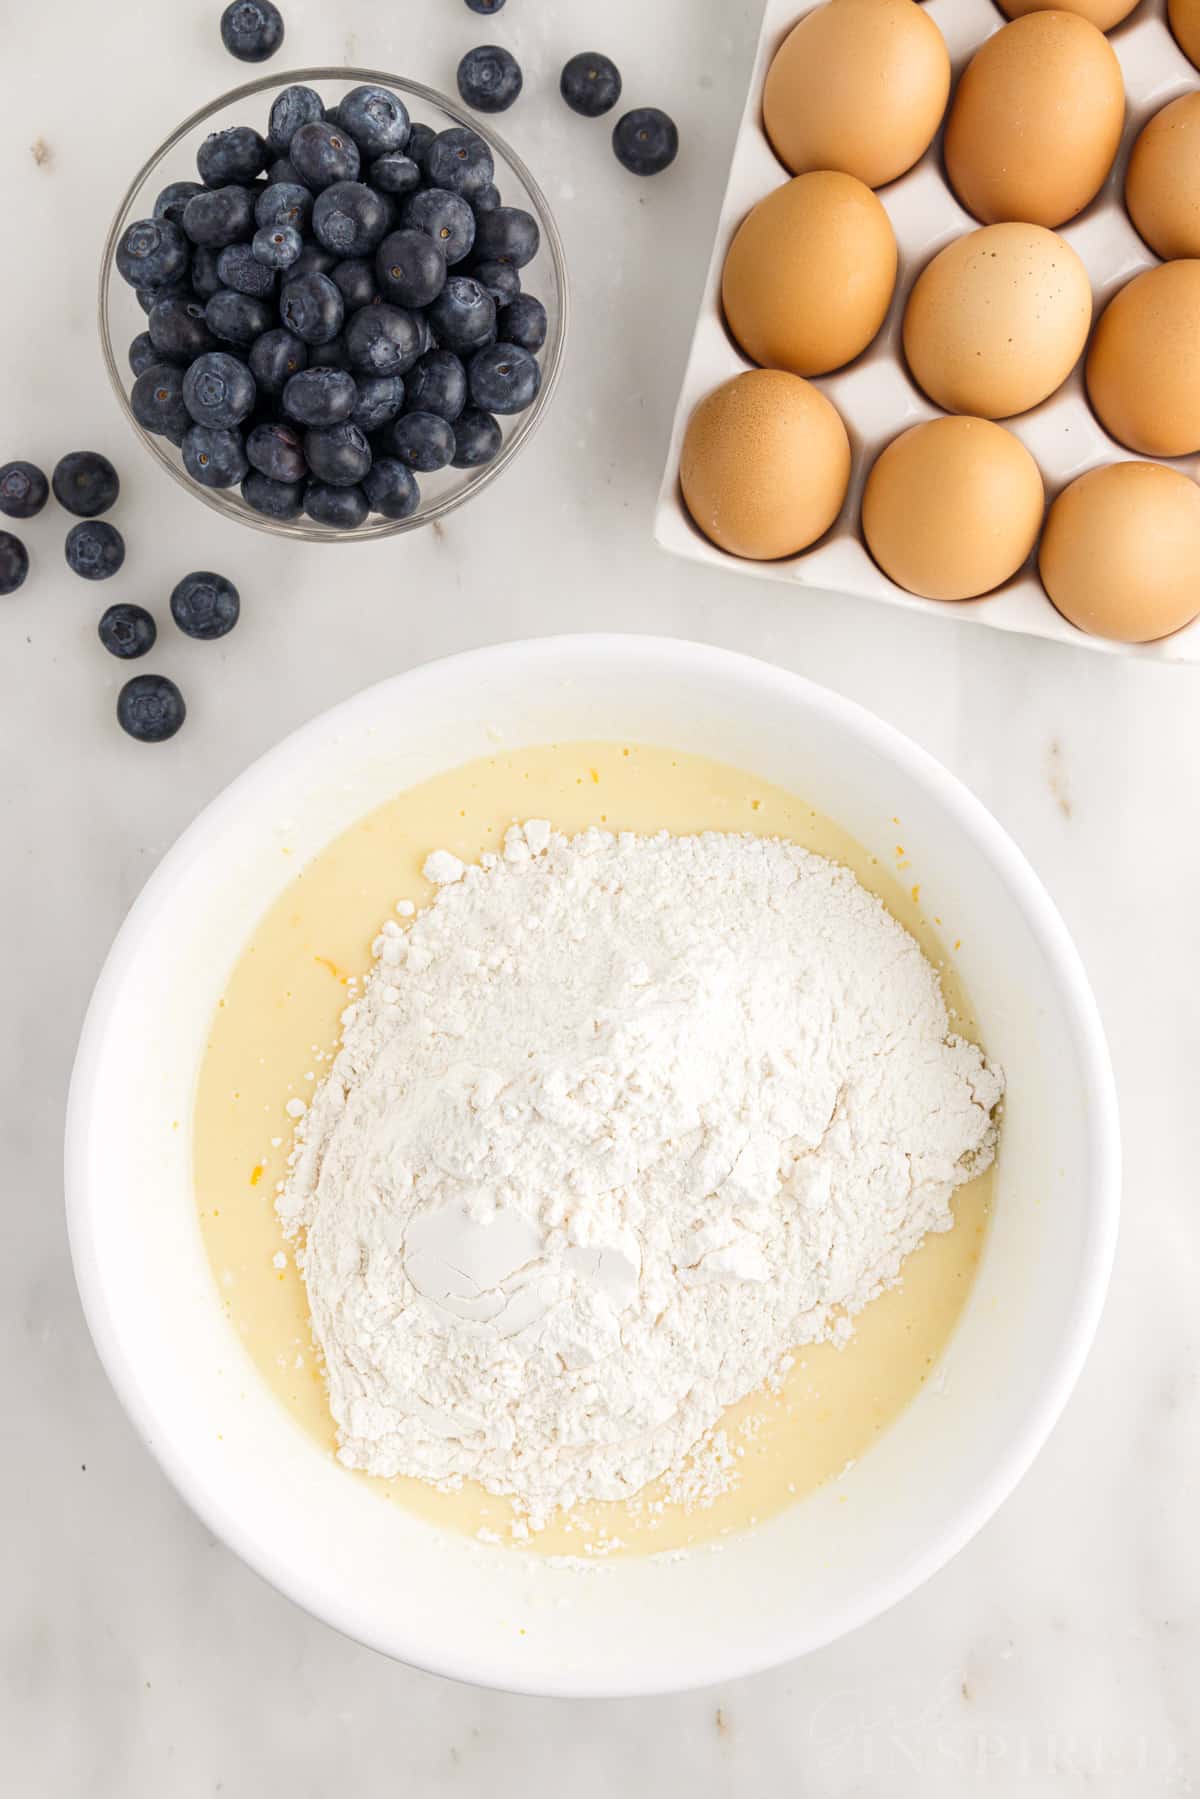 Dry ingredients are added to wet ingredients next to eggs and blueberries.